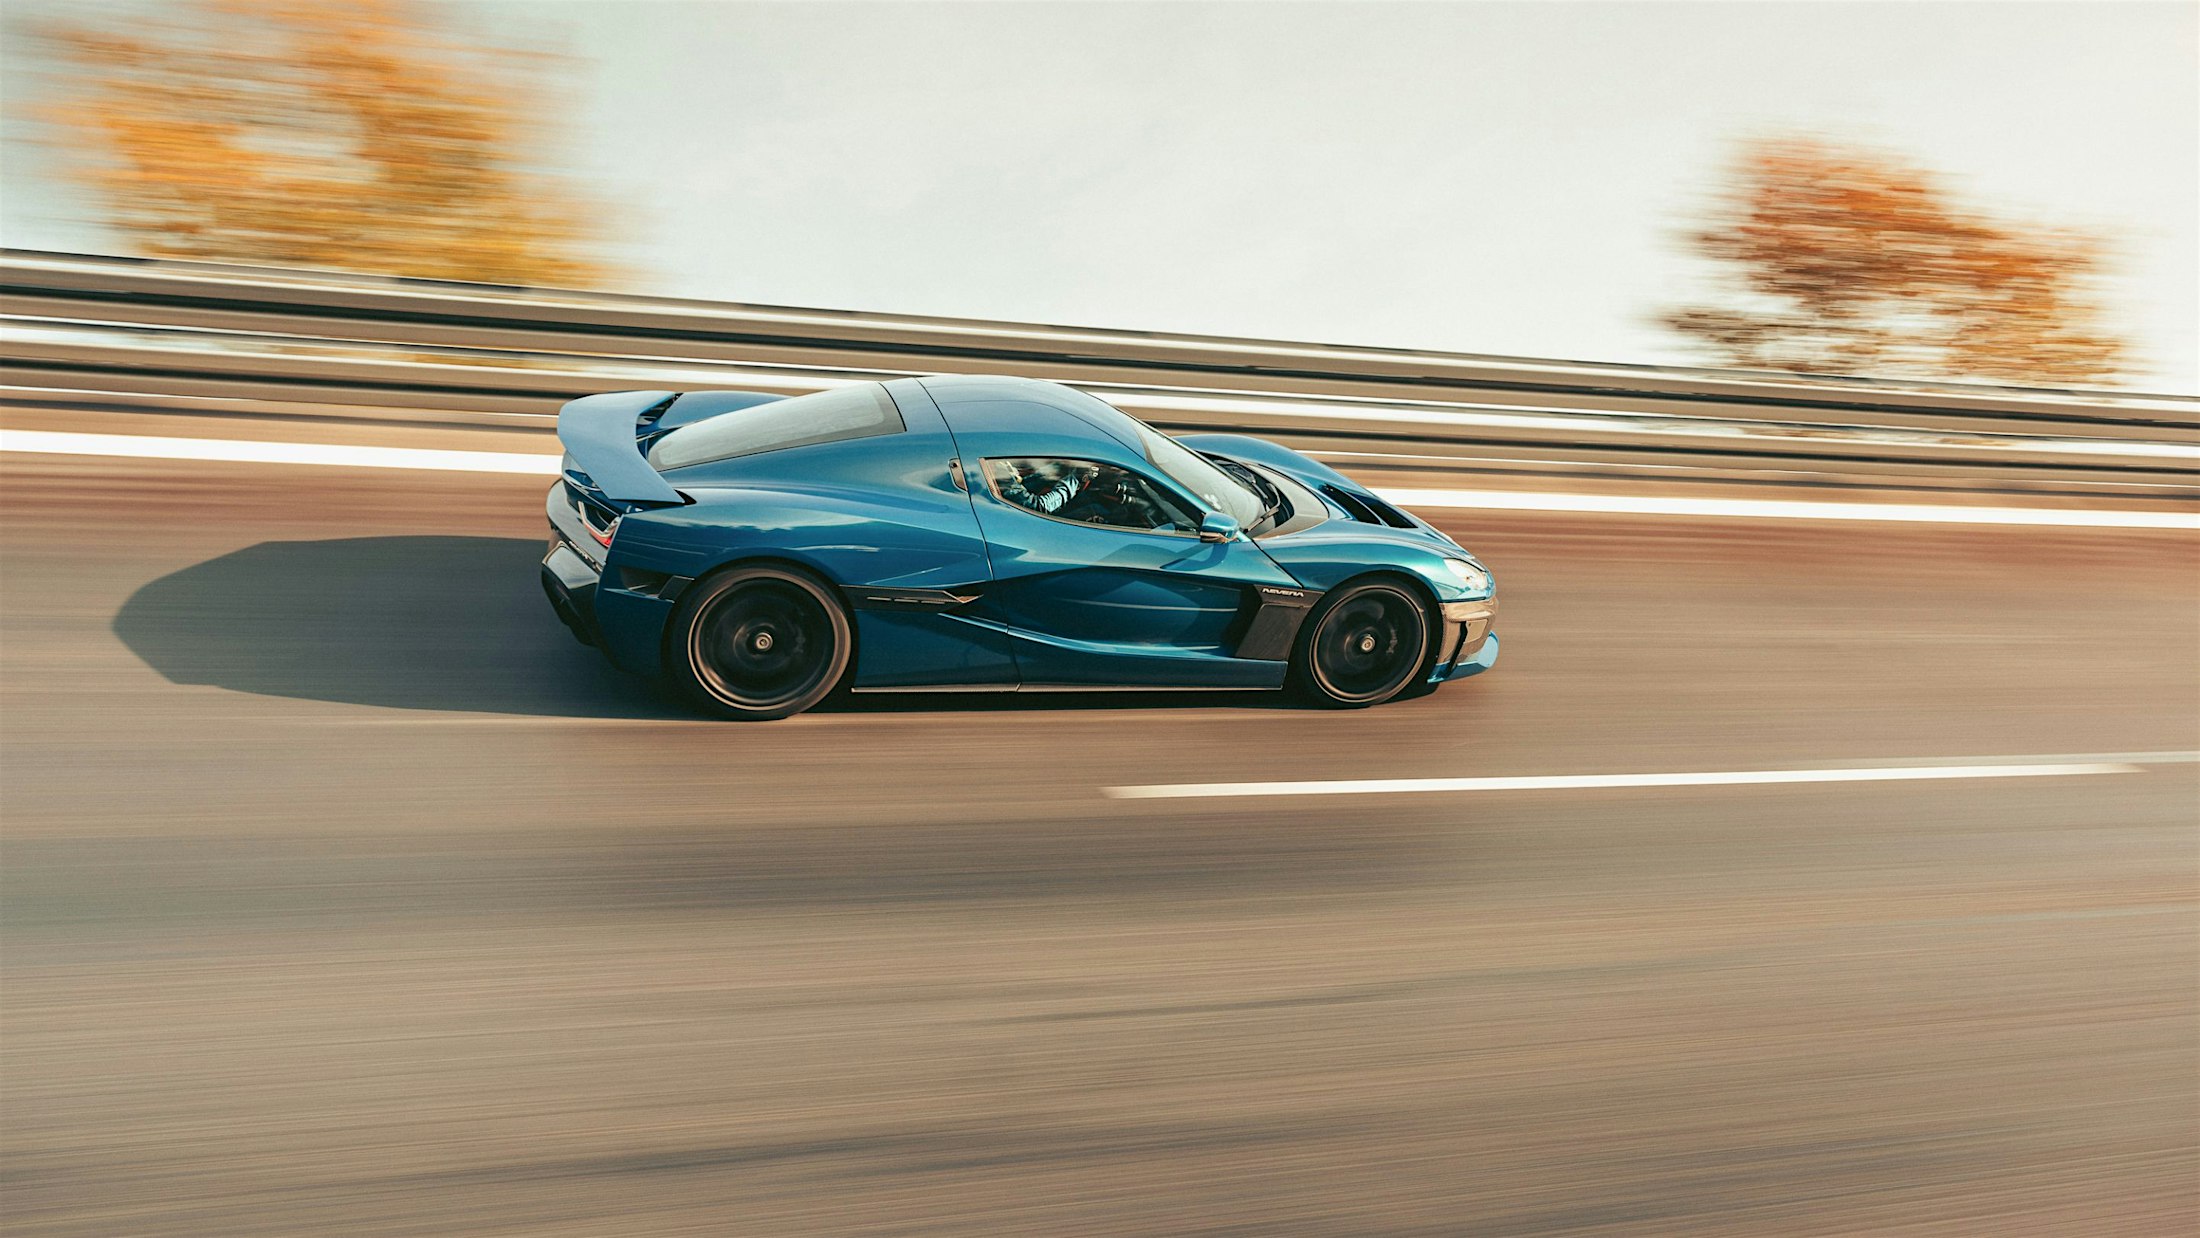 Record-Breaking Rimac Nevera Hits 412kph to Become World’s Fastest Production Electric Car